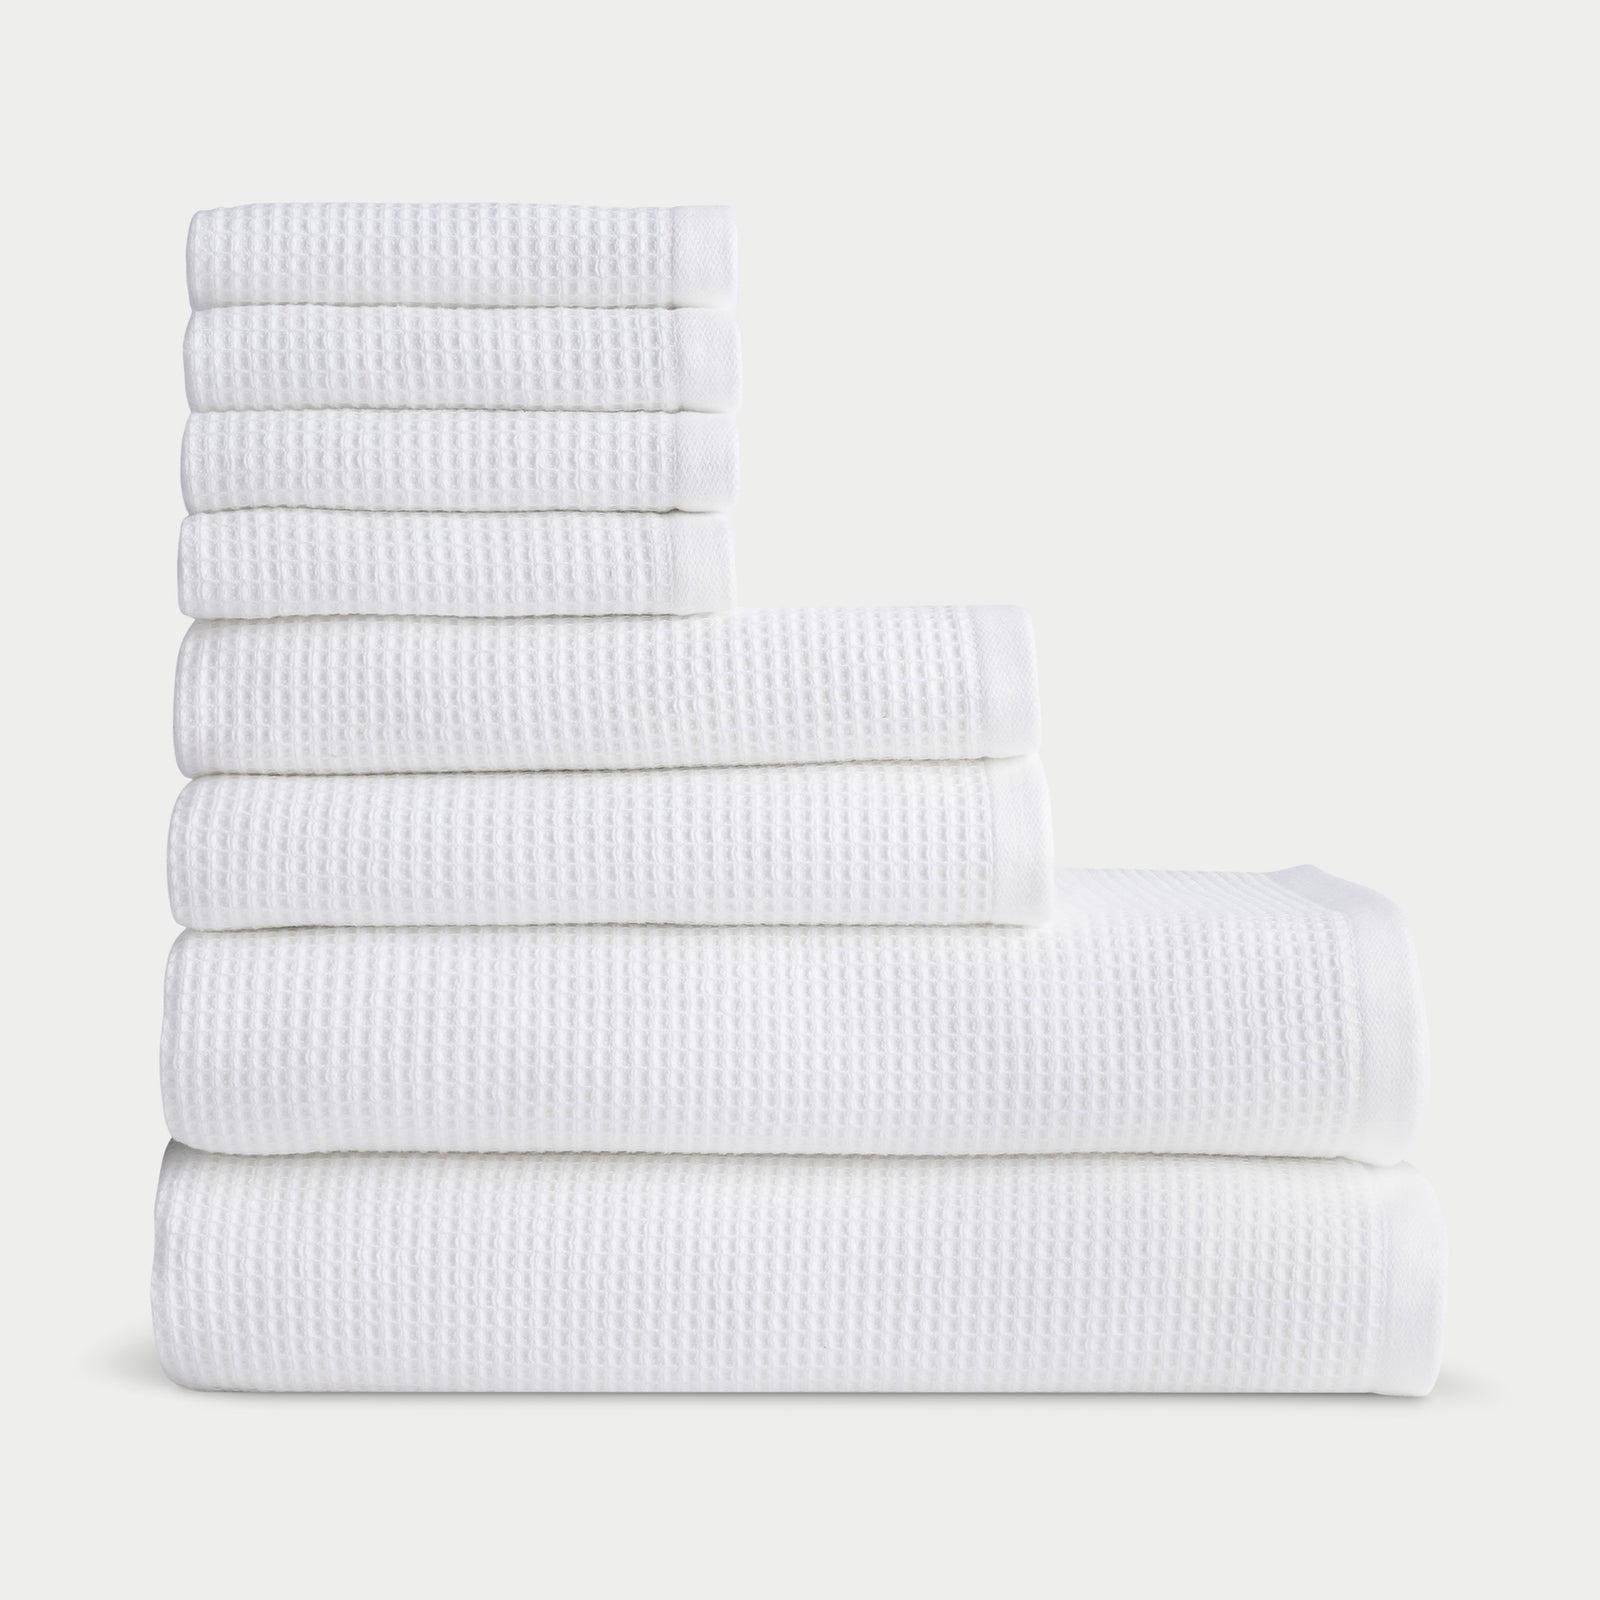 Waffle Bath Towel Set in the color White. Photo of white Waffle Bath Towel Set taken with white background. 